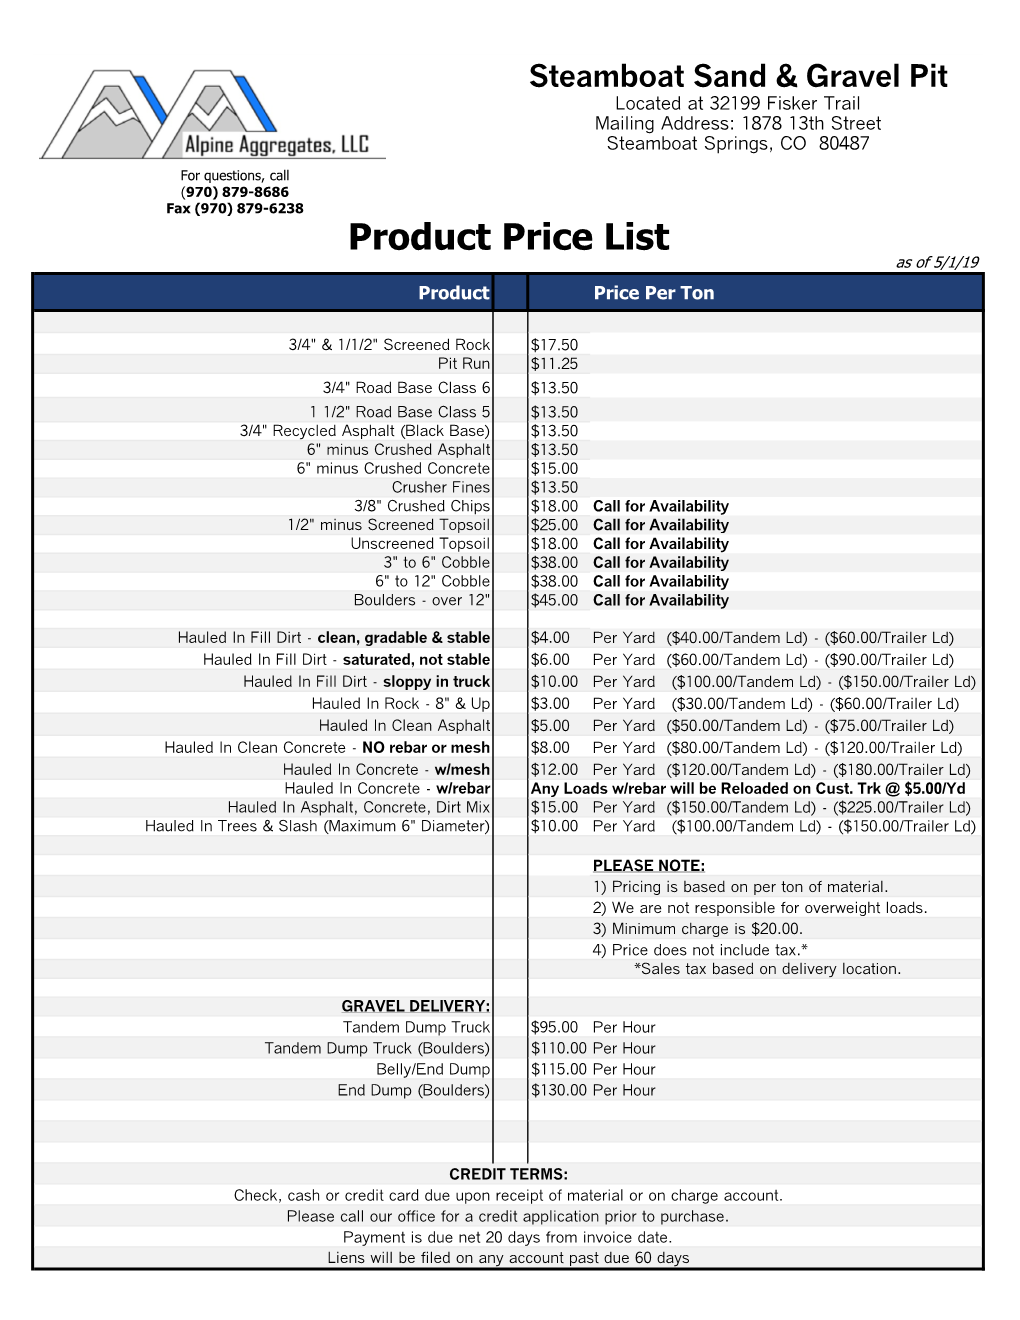 Product Price List As of 5/1/19 Product Price Per Ton